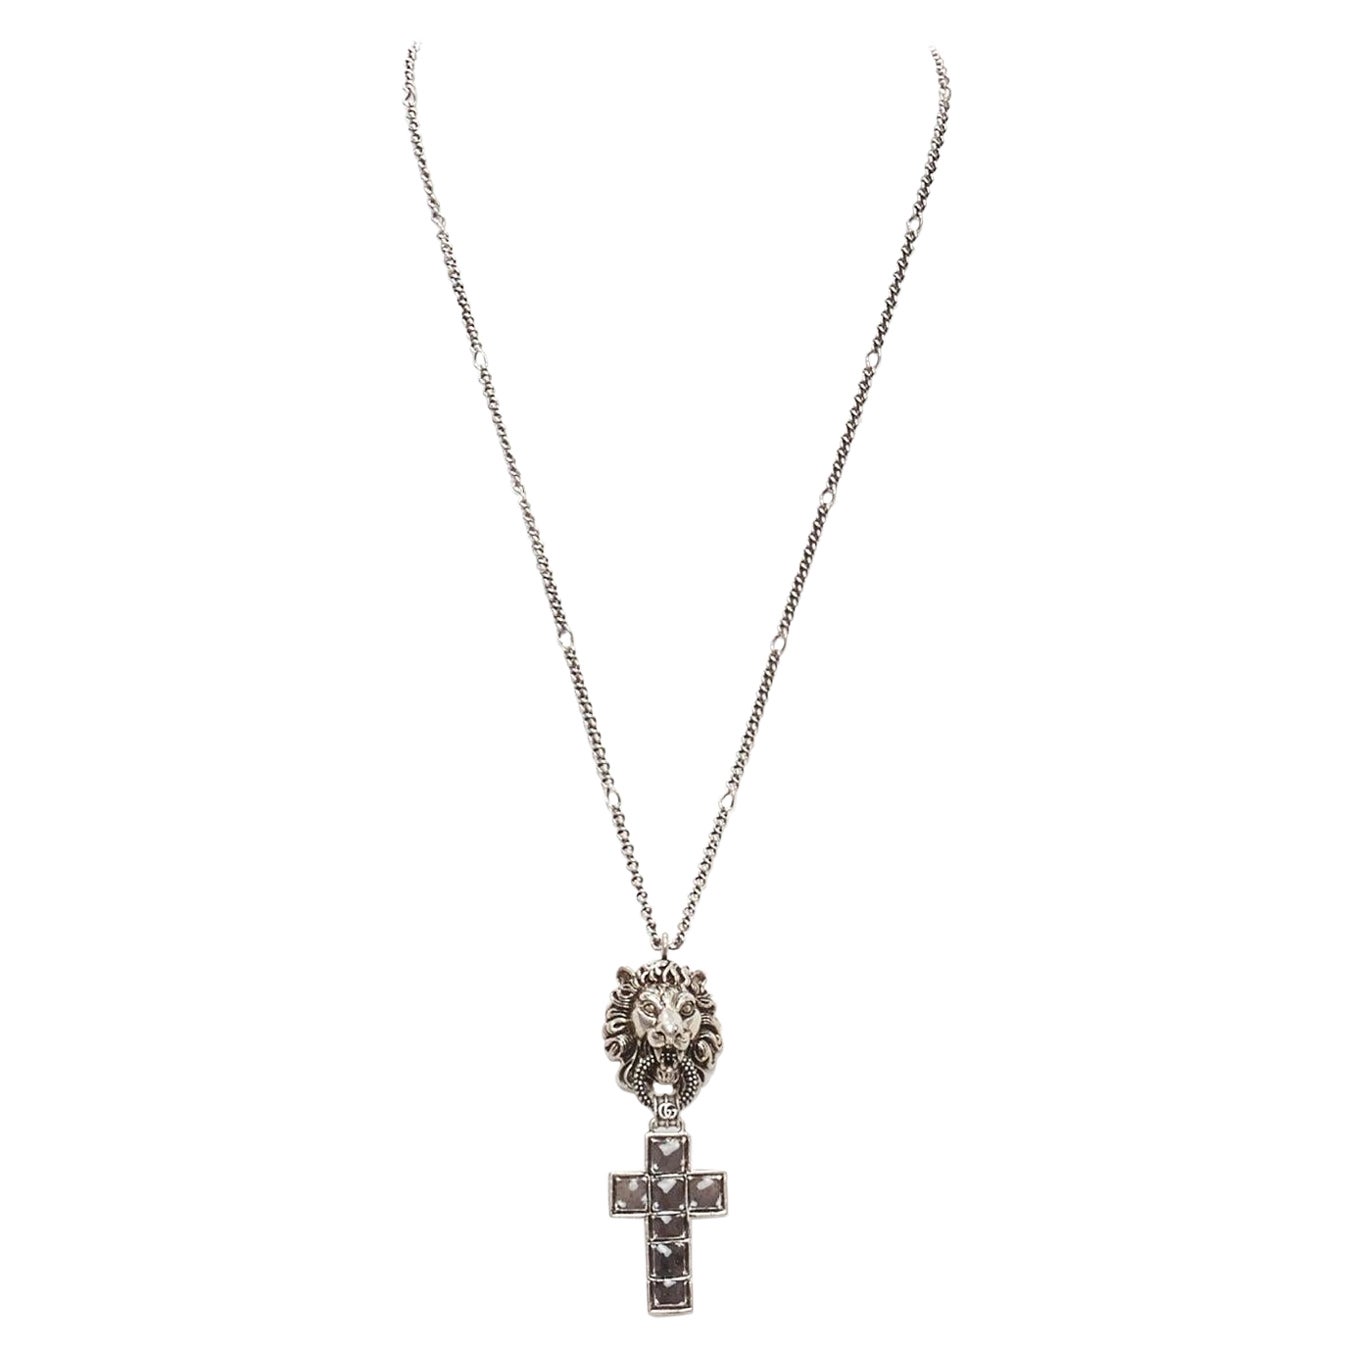 GUCCI Alessandro Michele Lion head Byzantine cross long necklace For Sale